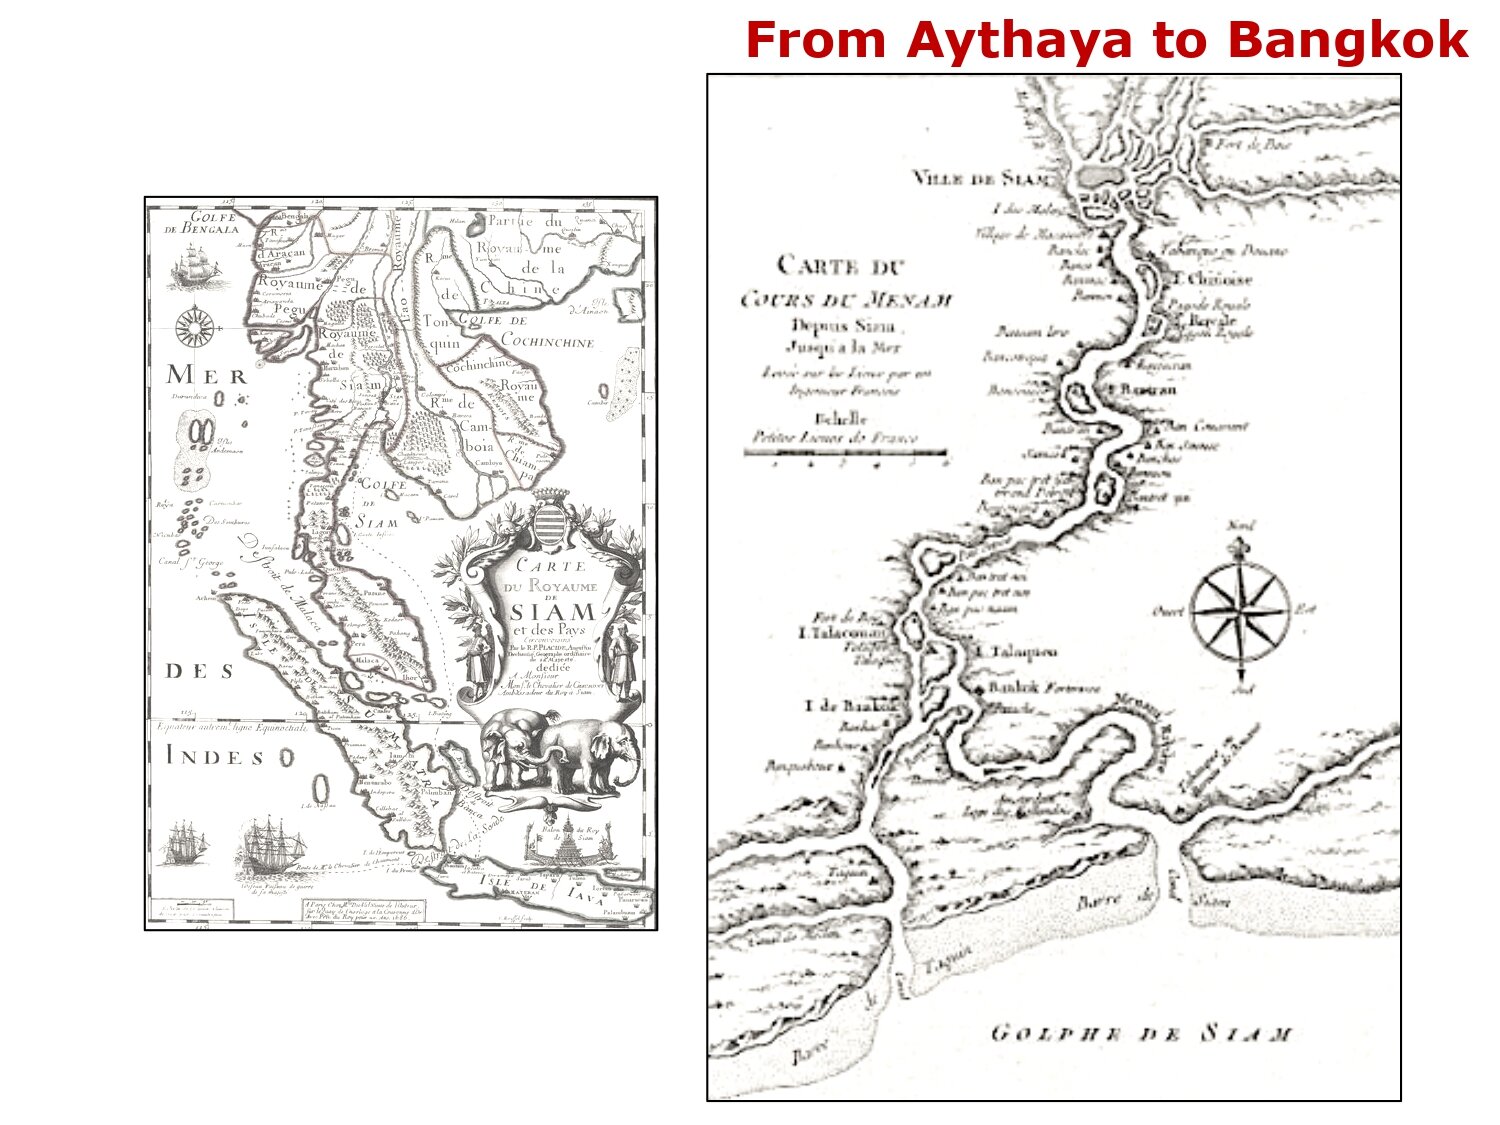 0_AUN-ADERA_The Story of Banbu_the Heritage from Ayutthay_pages-to-jpg-0014.jpg